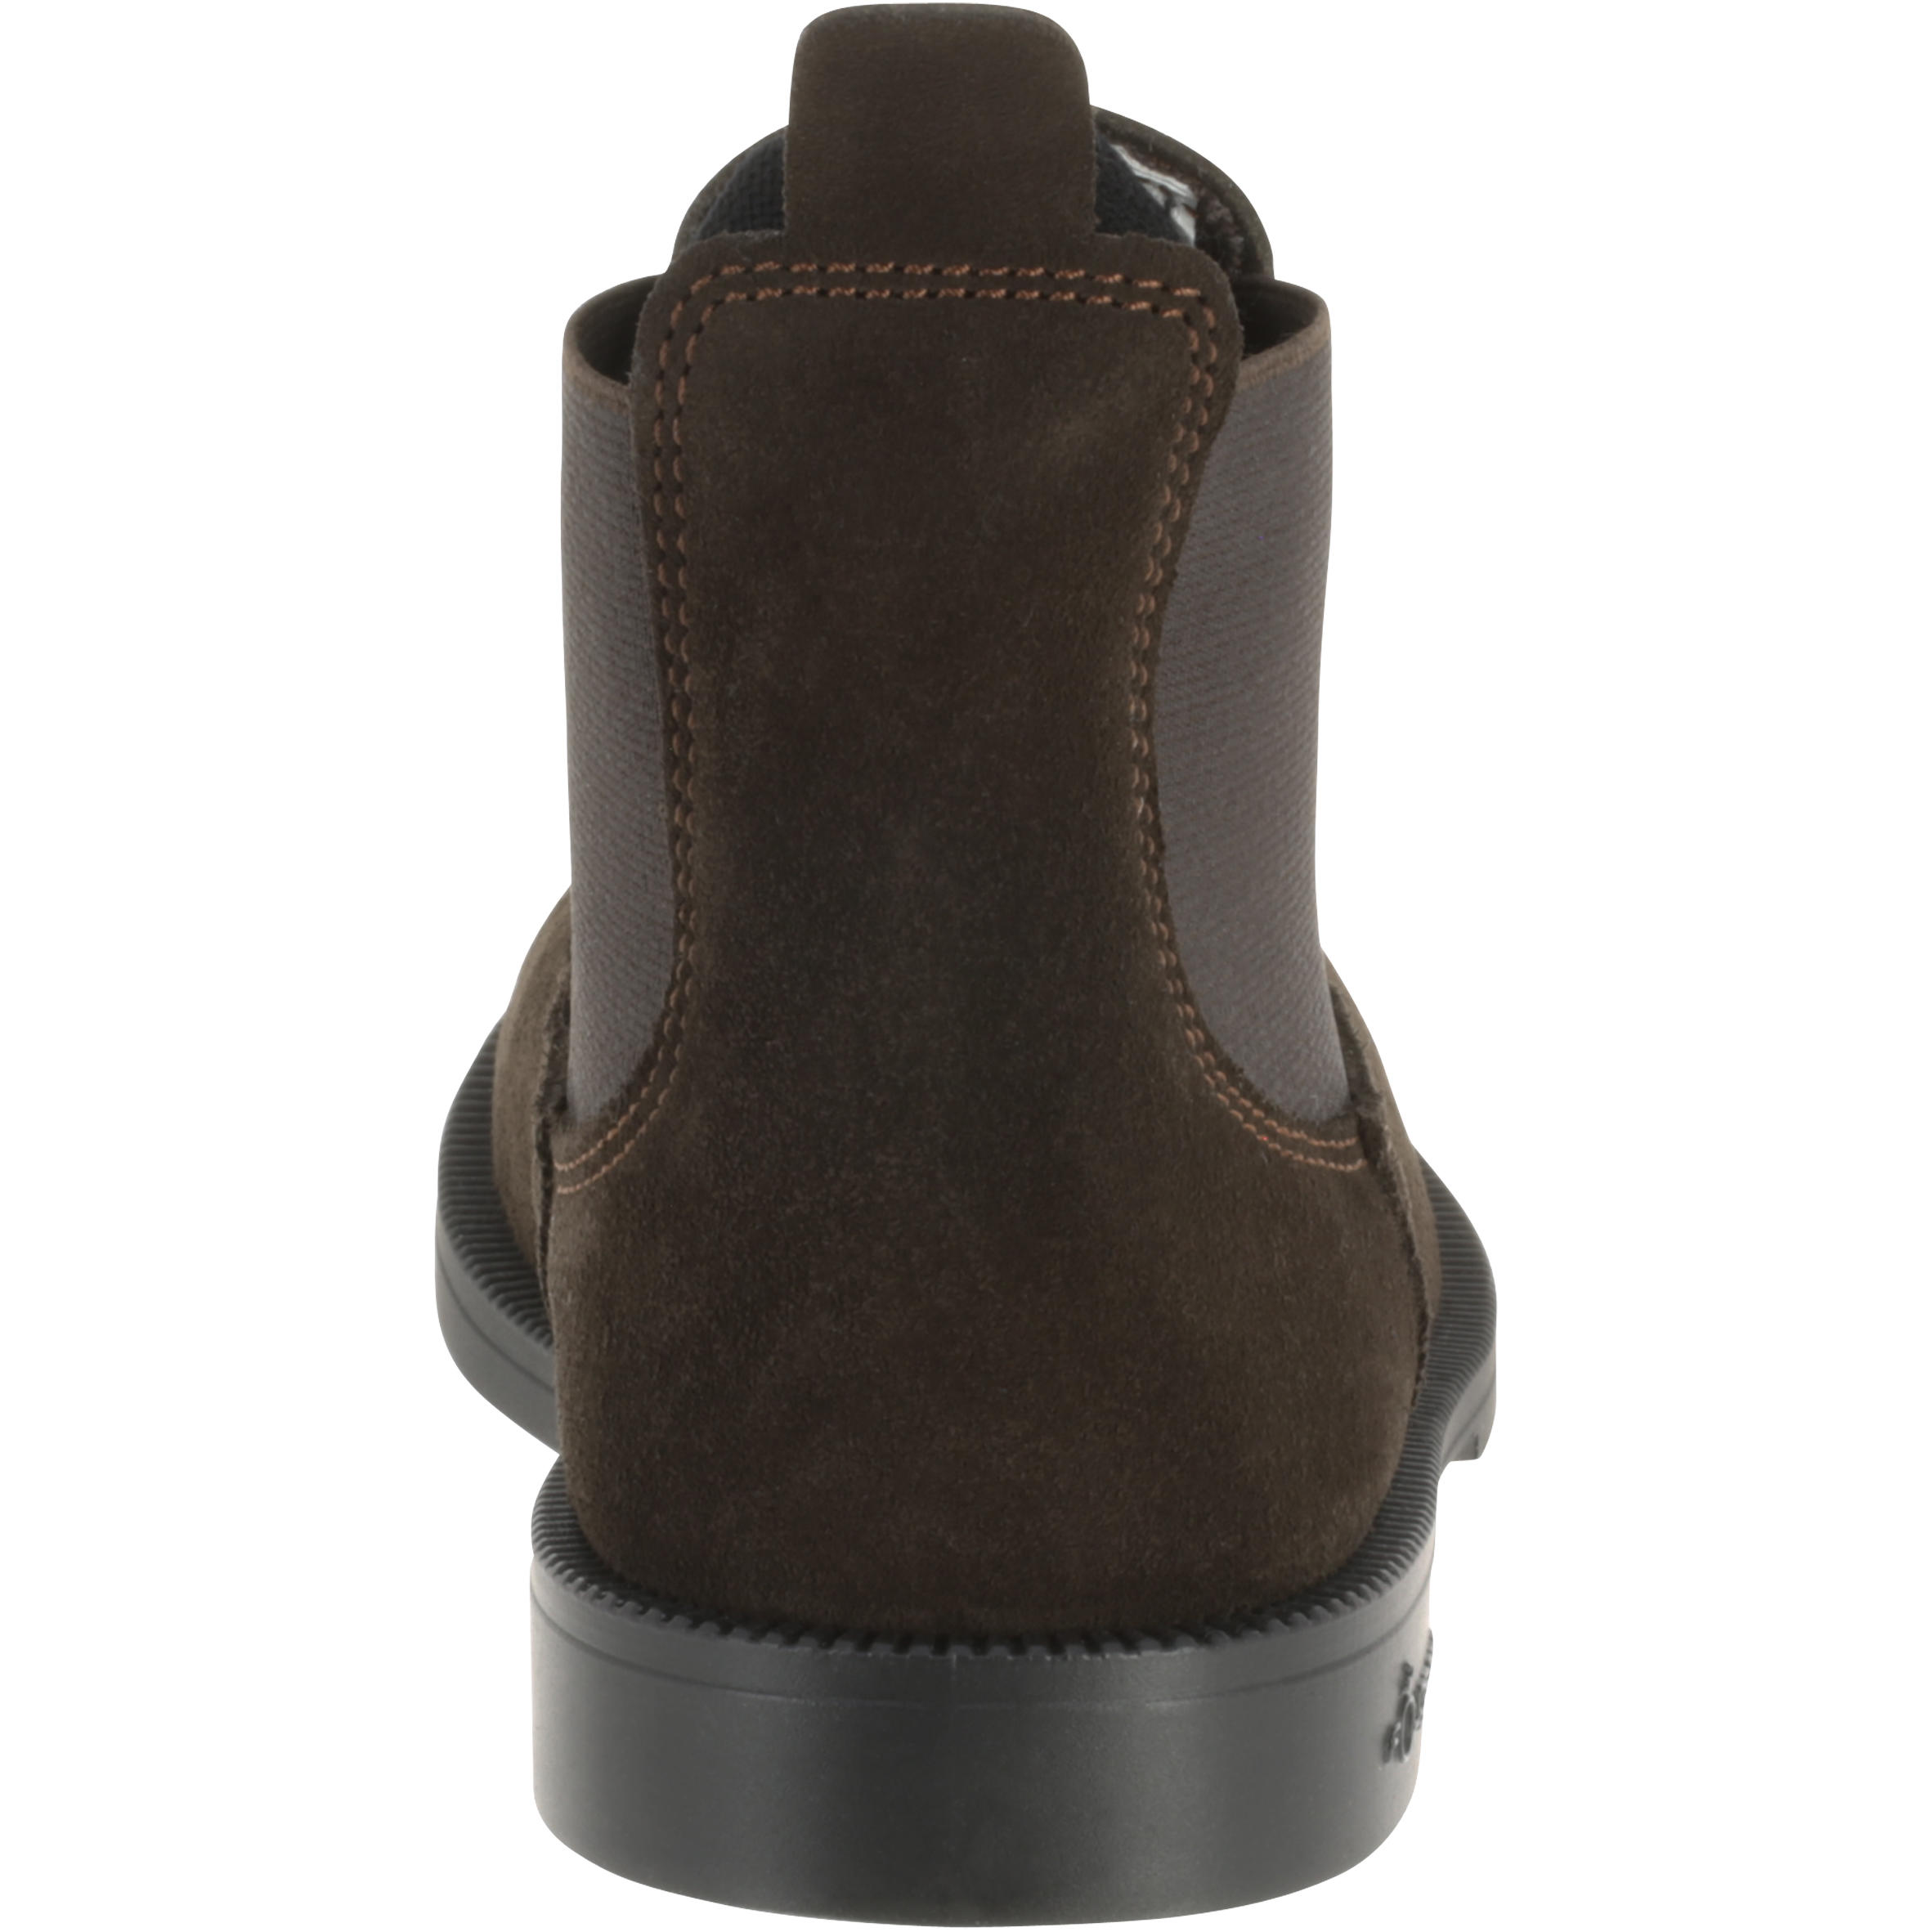 Kids' Horse Riding Leather Jodhpur Boots Classic - Brown 5/13